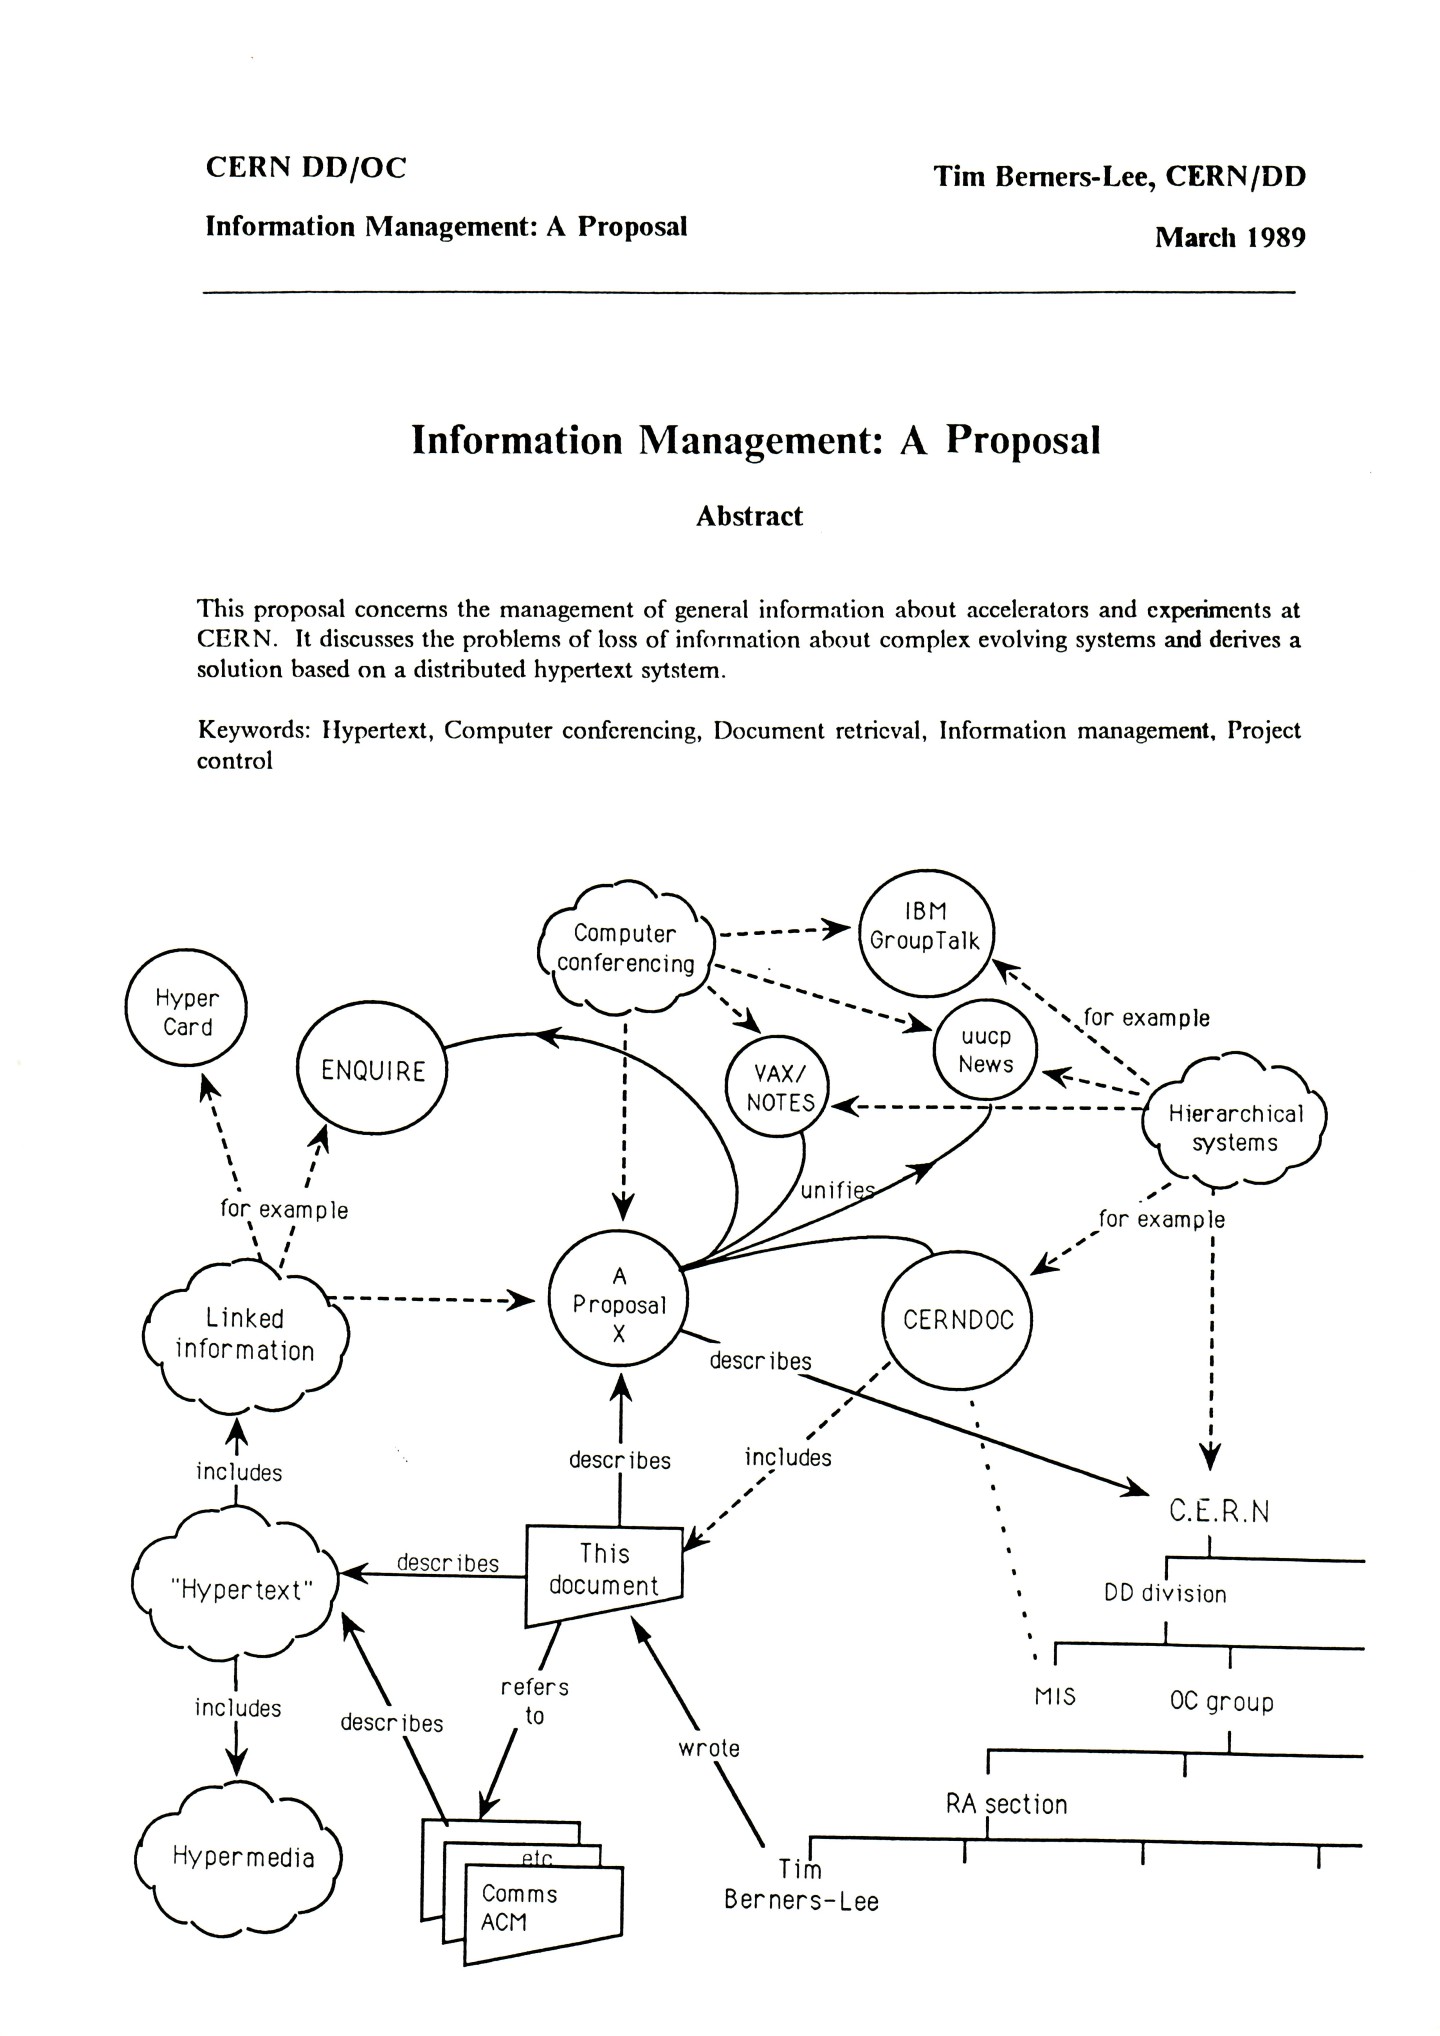 An image of the first page of Tim Berners-Lee's proposal for the World Wide Web in March 1989